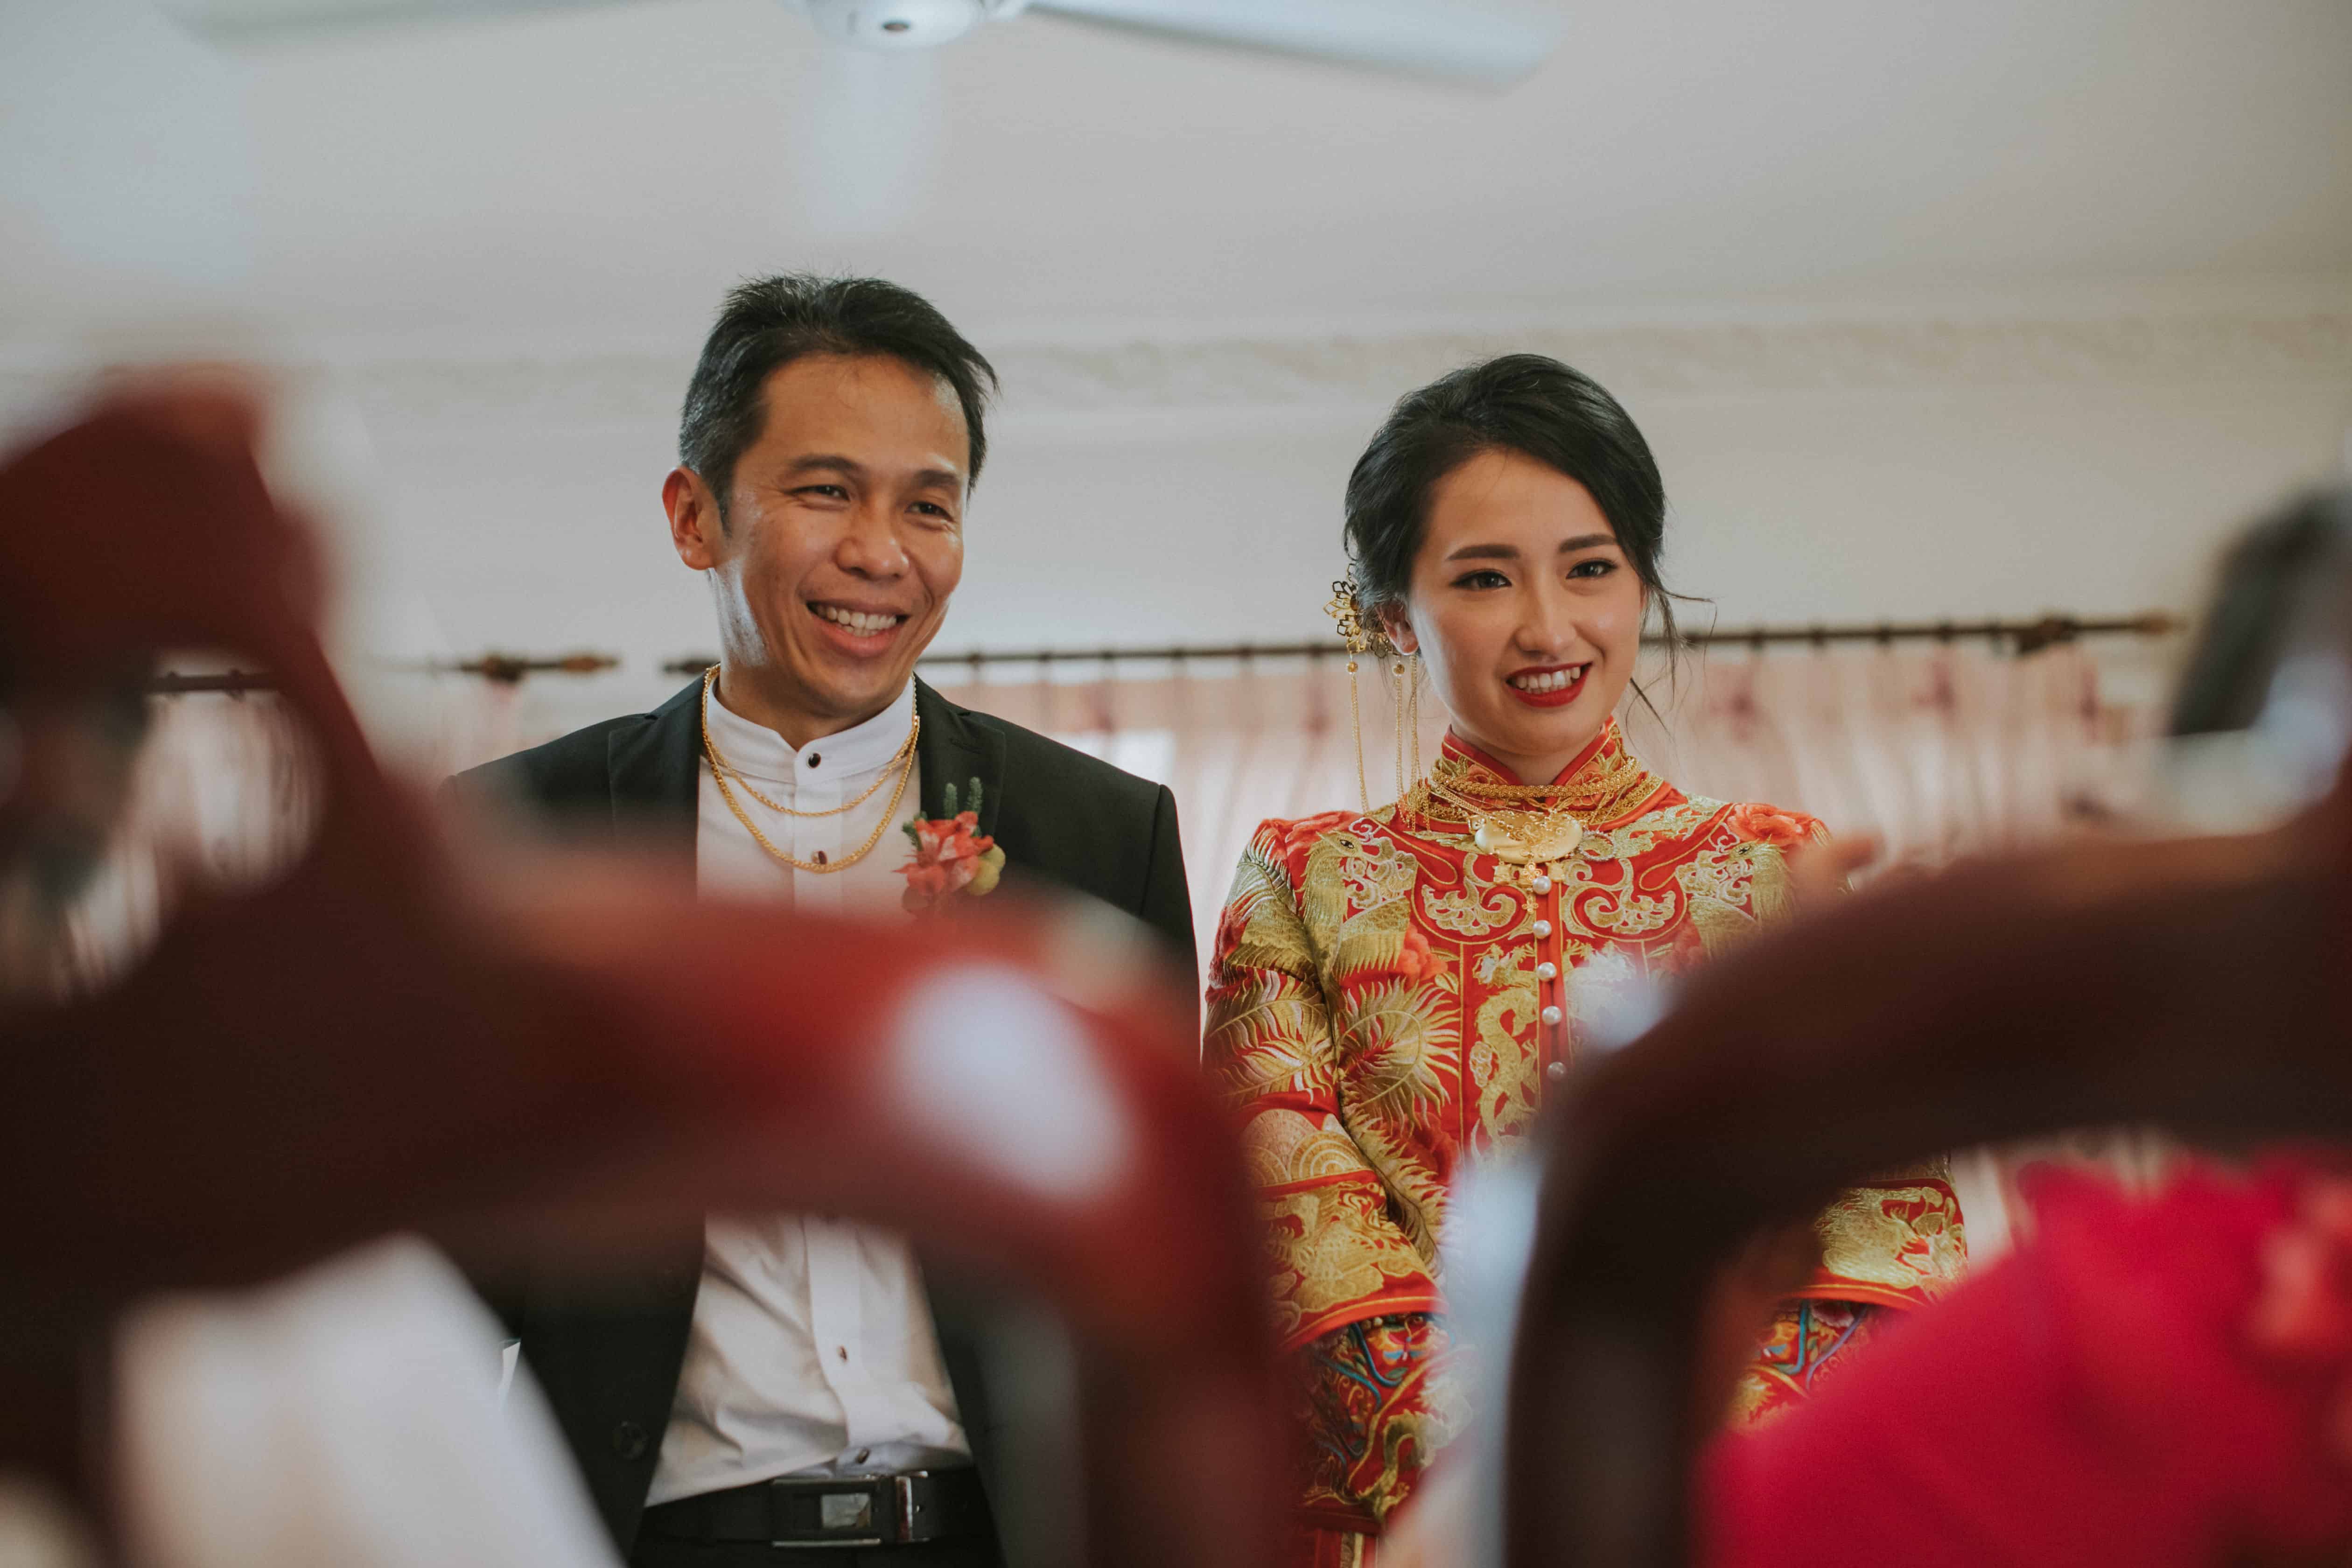 St. Regis Kuala Lumpur Hotel The Cross Effects Malaysia Destination Wedding Photographers Actual Day in Petaling Jaya Photography Traditional Chinese Tea Ceremony